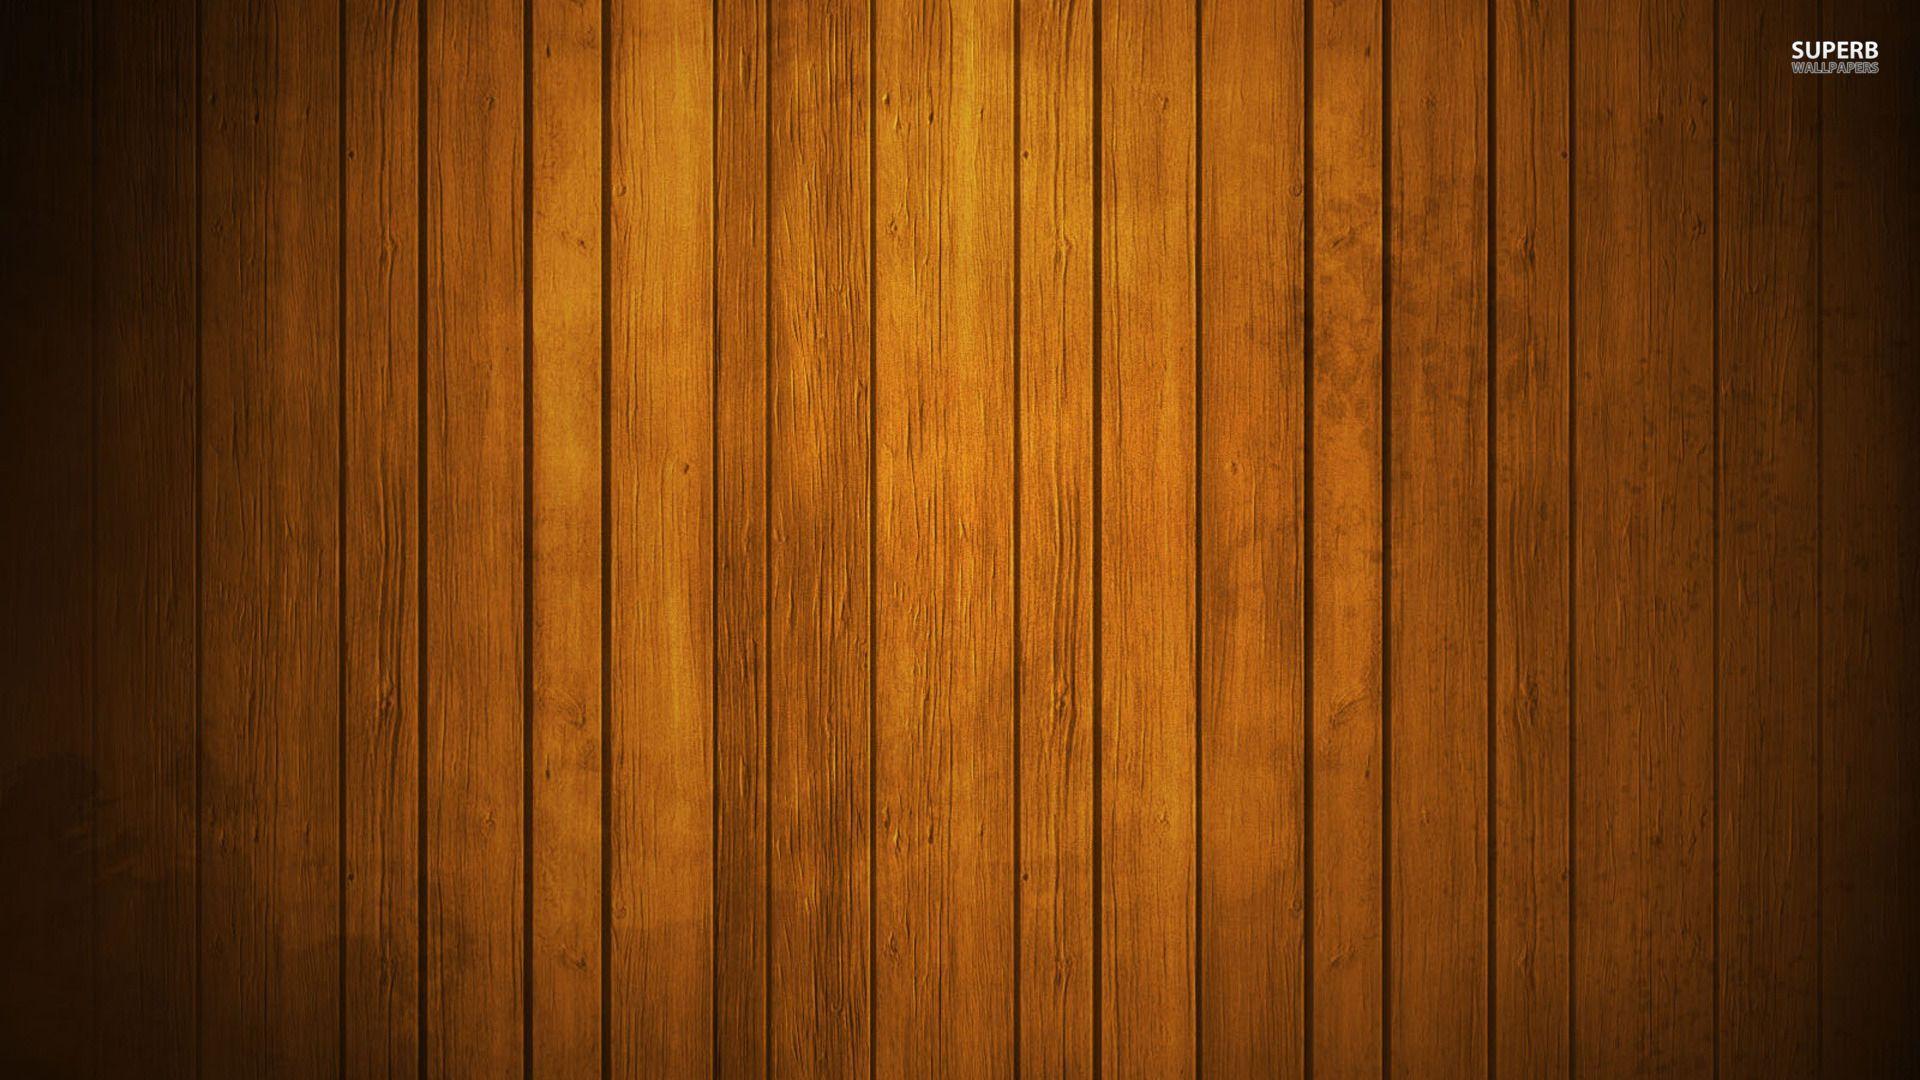 Wallpaper Madera Vintage Hd - Feel free to send us your own wallpaper ...